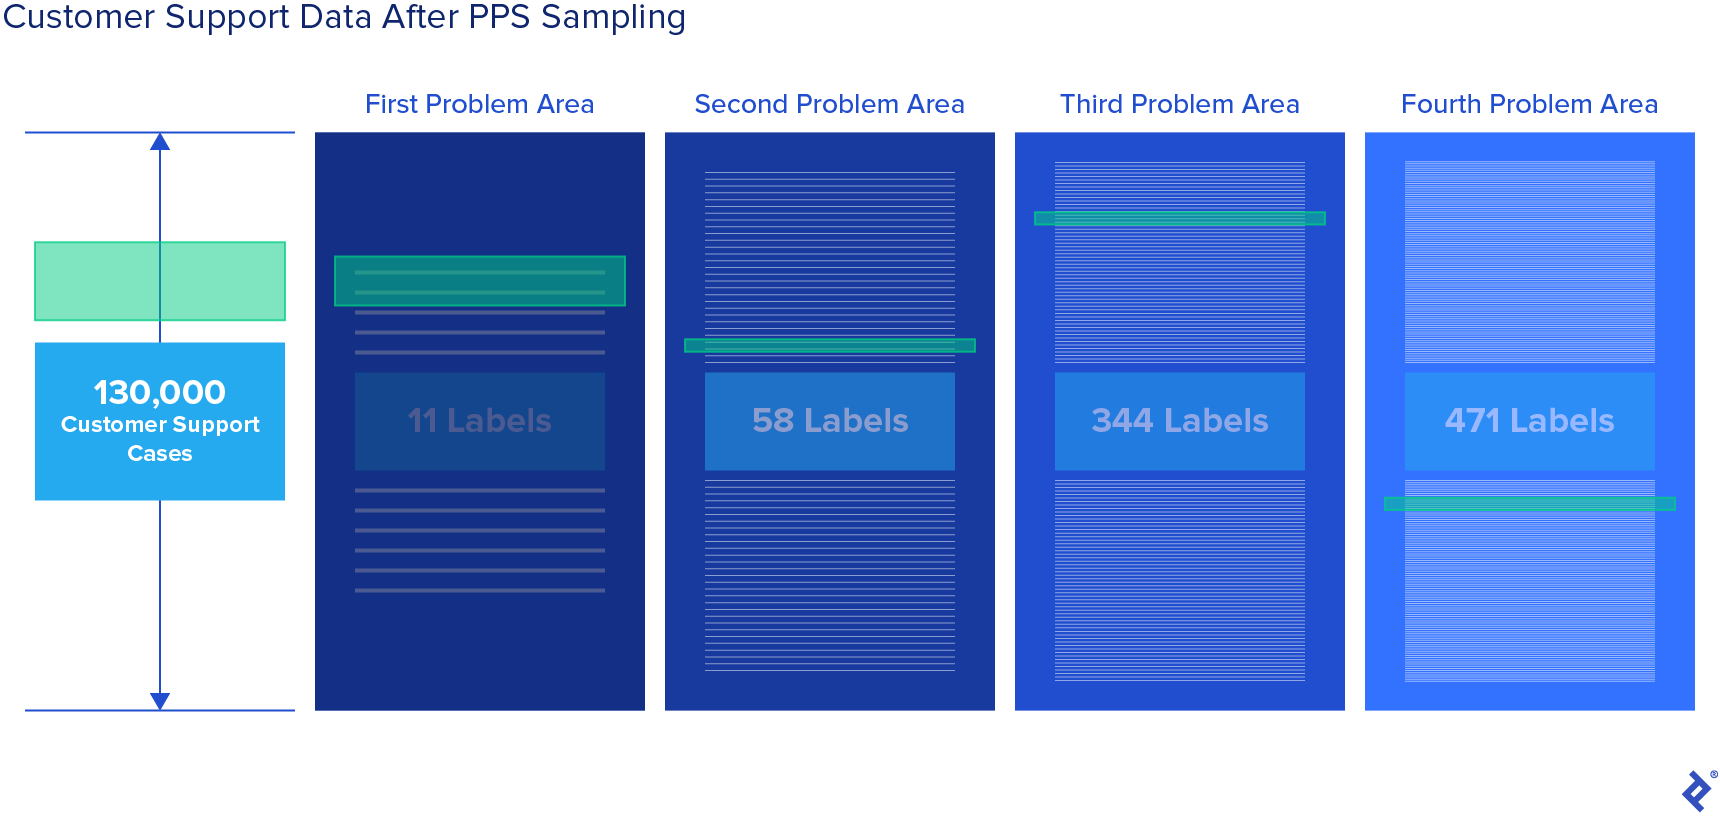 An illustration titled "Customer Support Data after PPS Sampling." The illustration represents 130,000 rows in which data was documented, with four columns of problem areas, identified as First Problem Area, Second Problem Area, Third Problem Area, and Fourth Problem Area. The number of problem area labels in each column are noted as 11 Labels, 58 Labels, 344 Labels, and 471 Labels, respectively. Additionally, highlighted boxes are added to represent the identifying of commonly-occurring labels within each problem area.